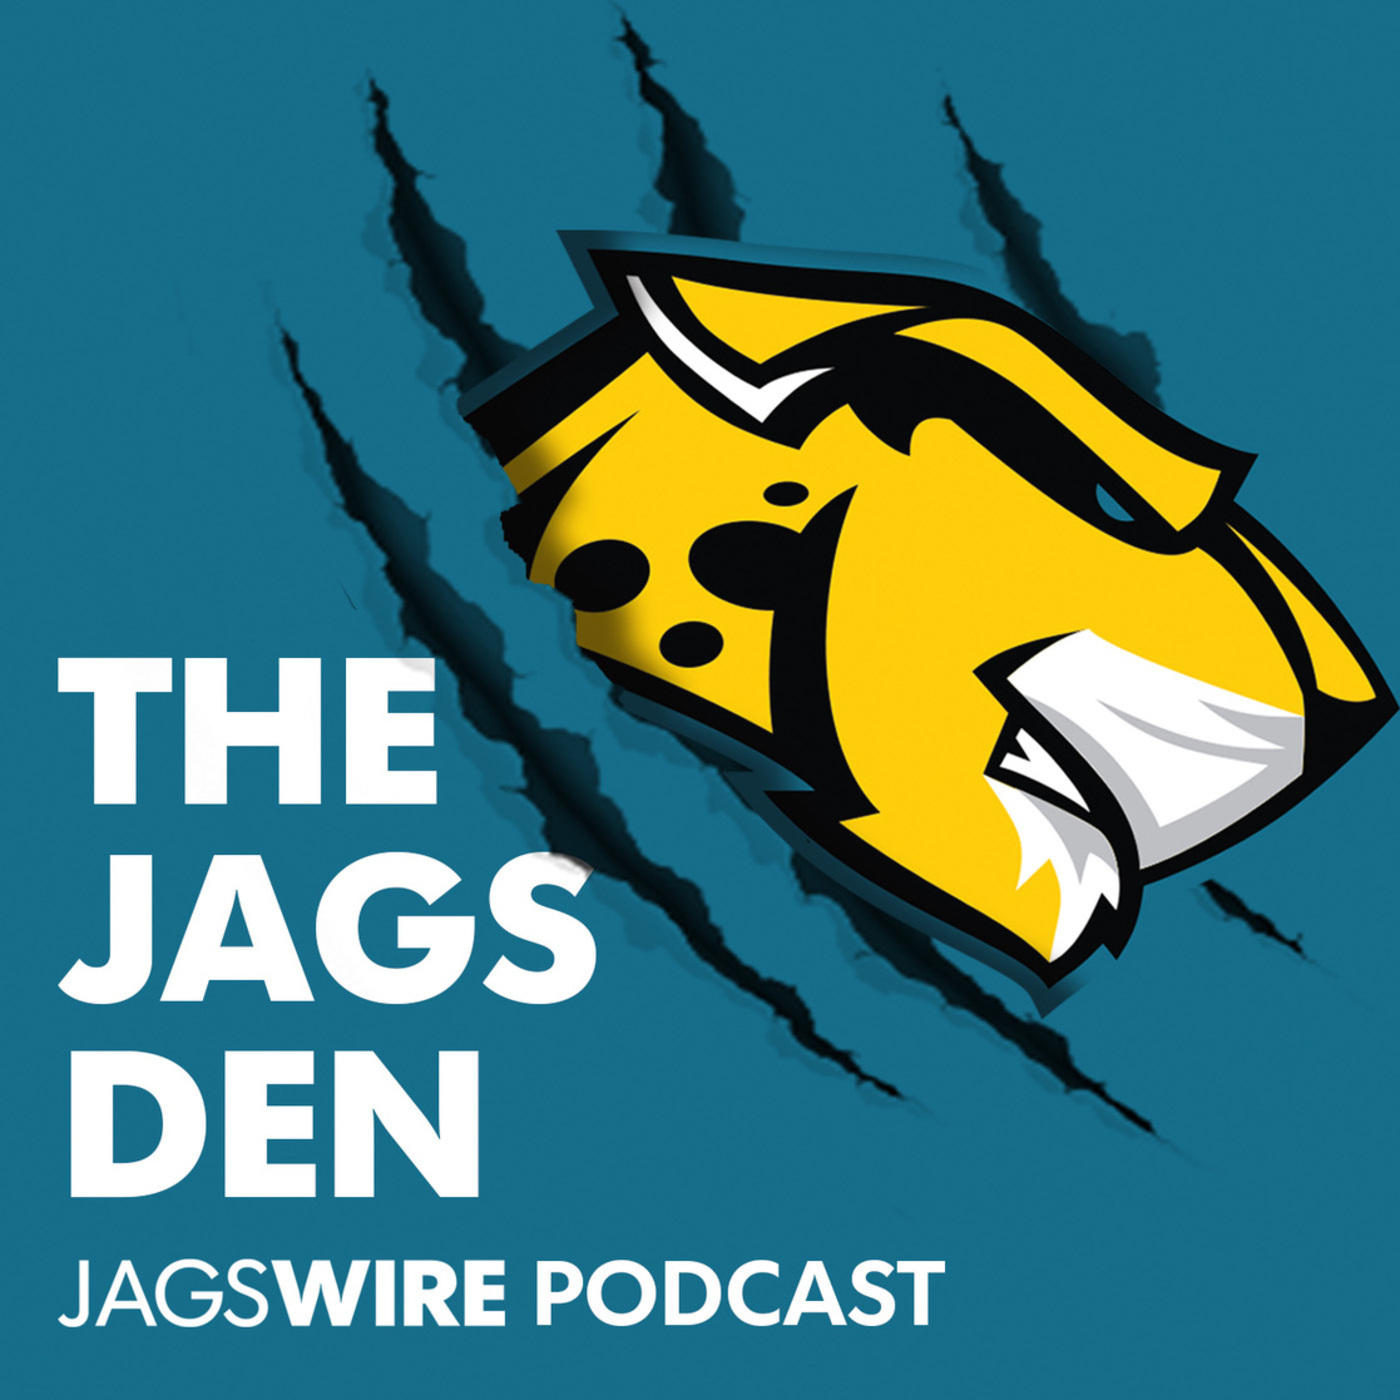 Jags Den Podcast Ep. 45: Freddy T shows some fire, Jaguars WK 1 training camps stock, discussions on importance of recent Lot J deal 